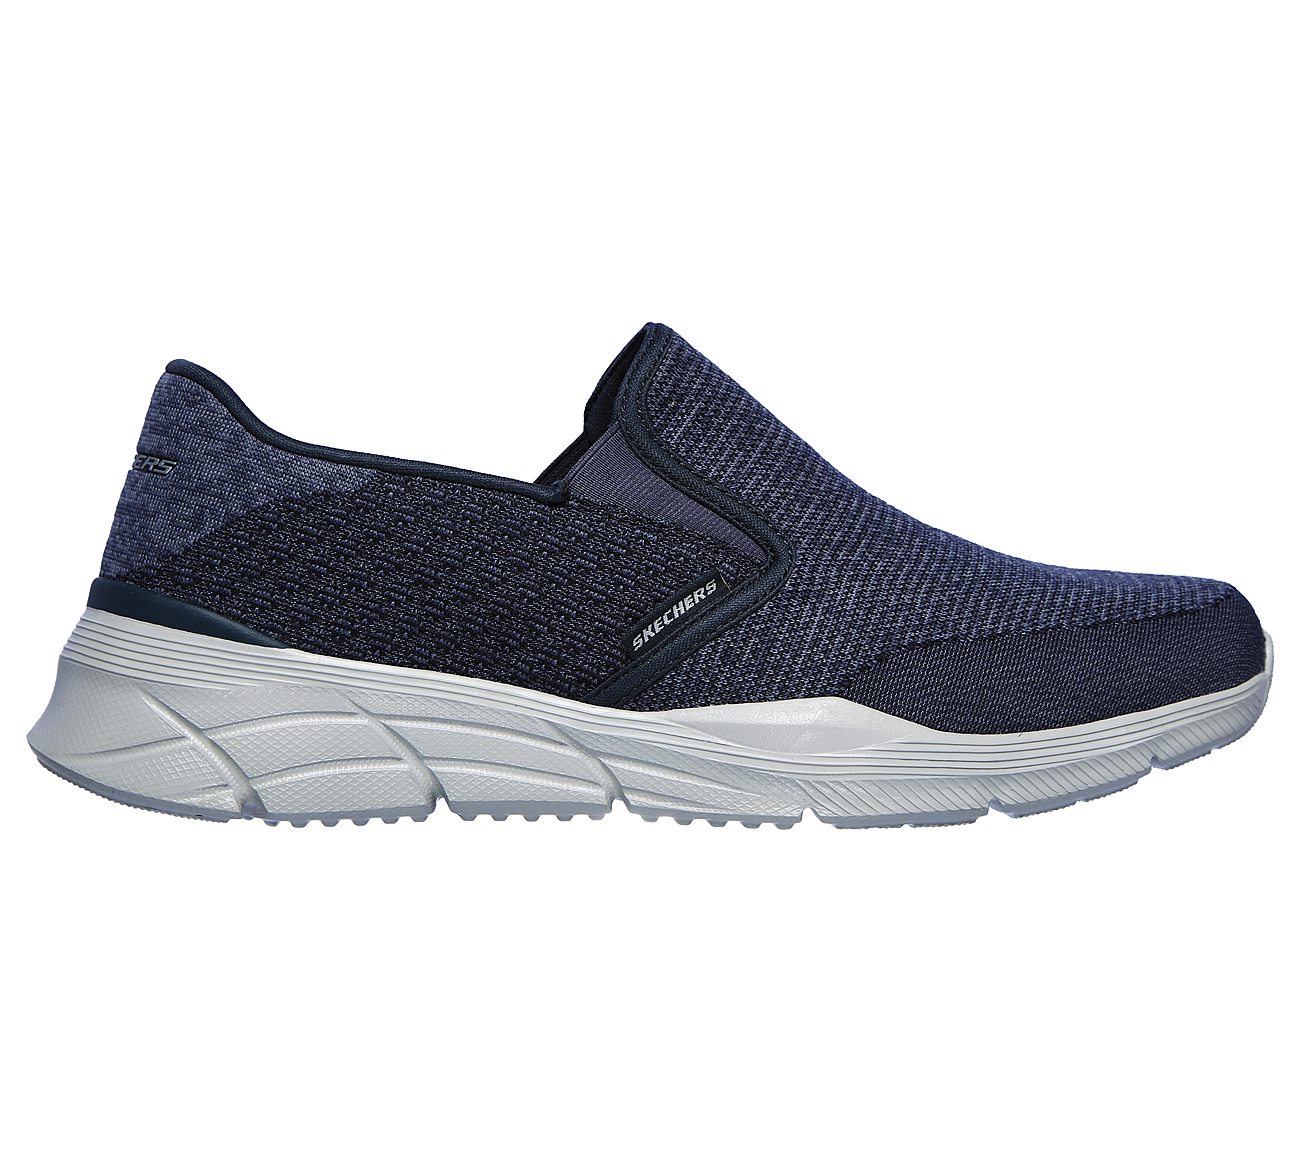 EQUALIZER 4.0 - REVIVIFY, NAVY/GREY Footwear Right View